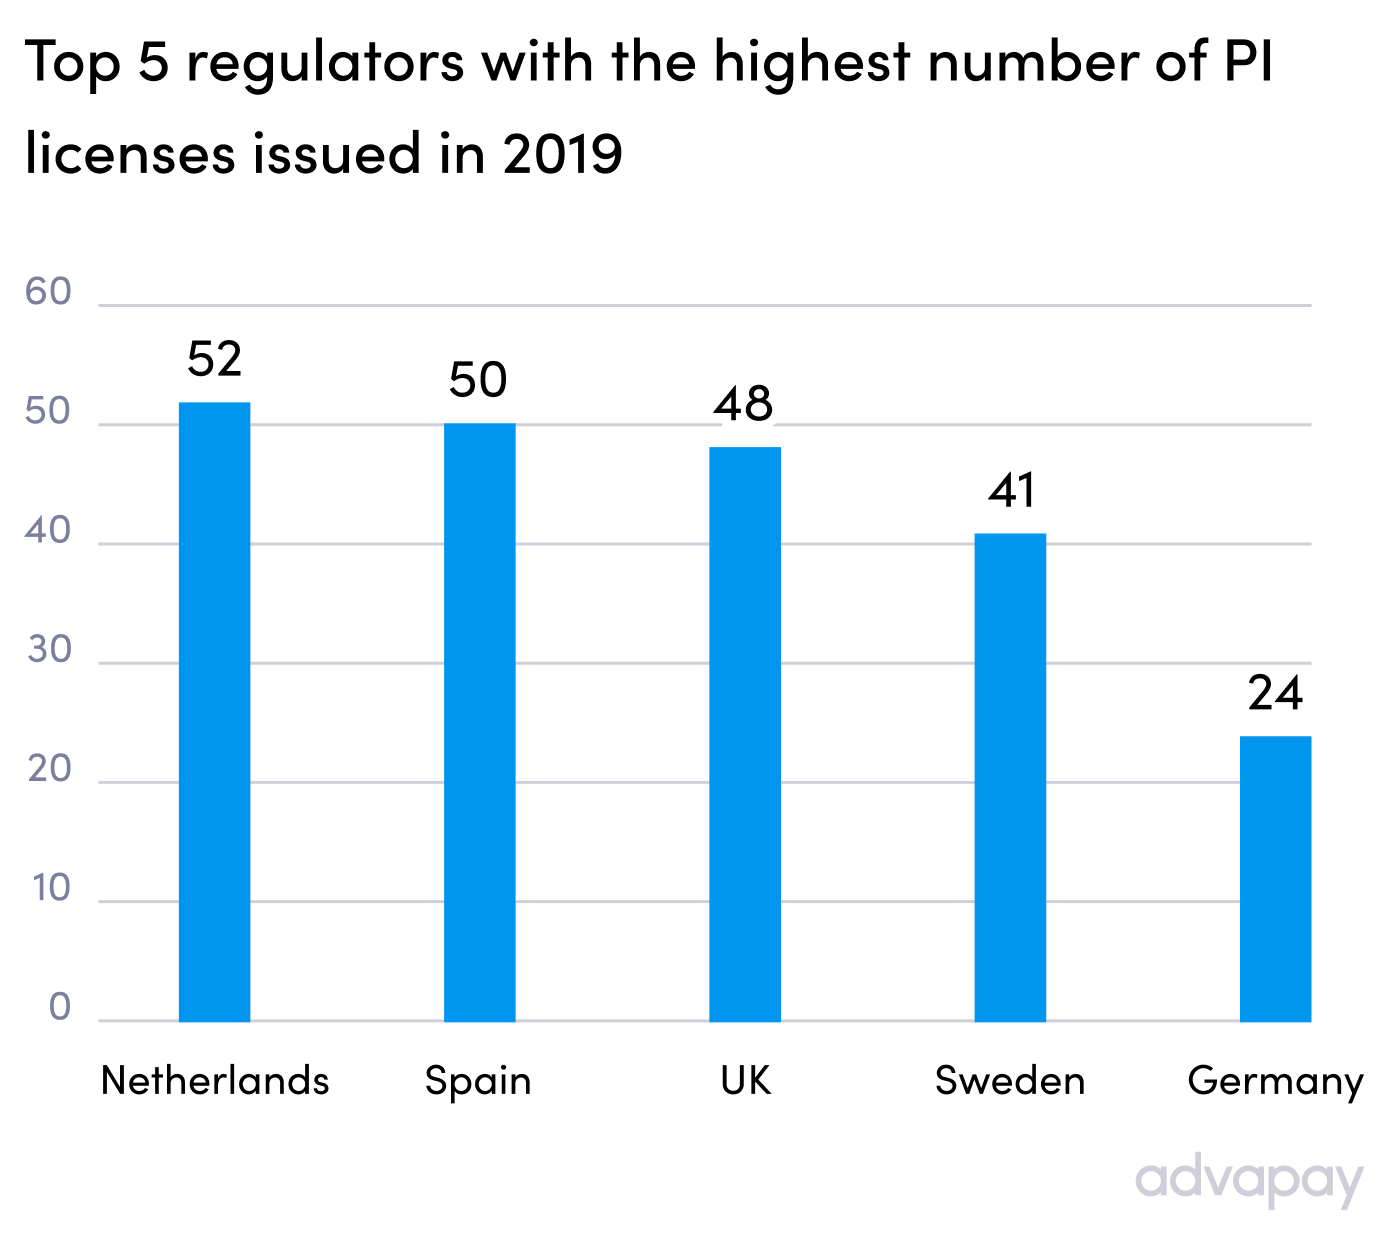 Top 5 regulators with the highest number of PI licenses issued in 2019